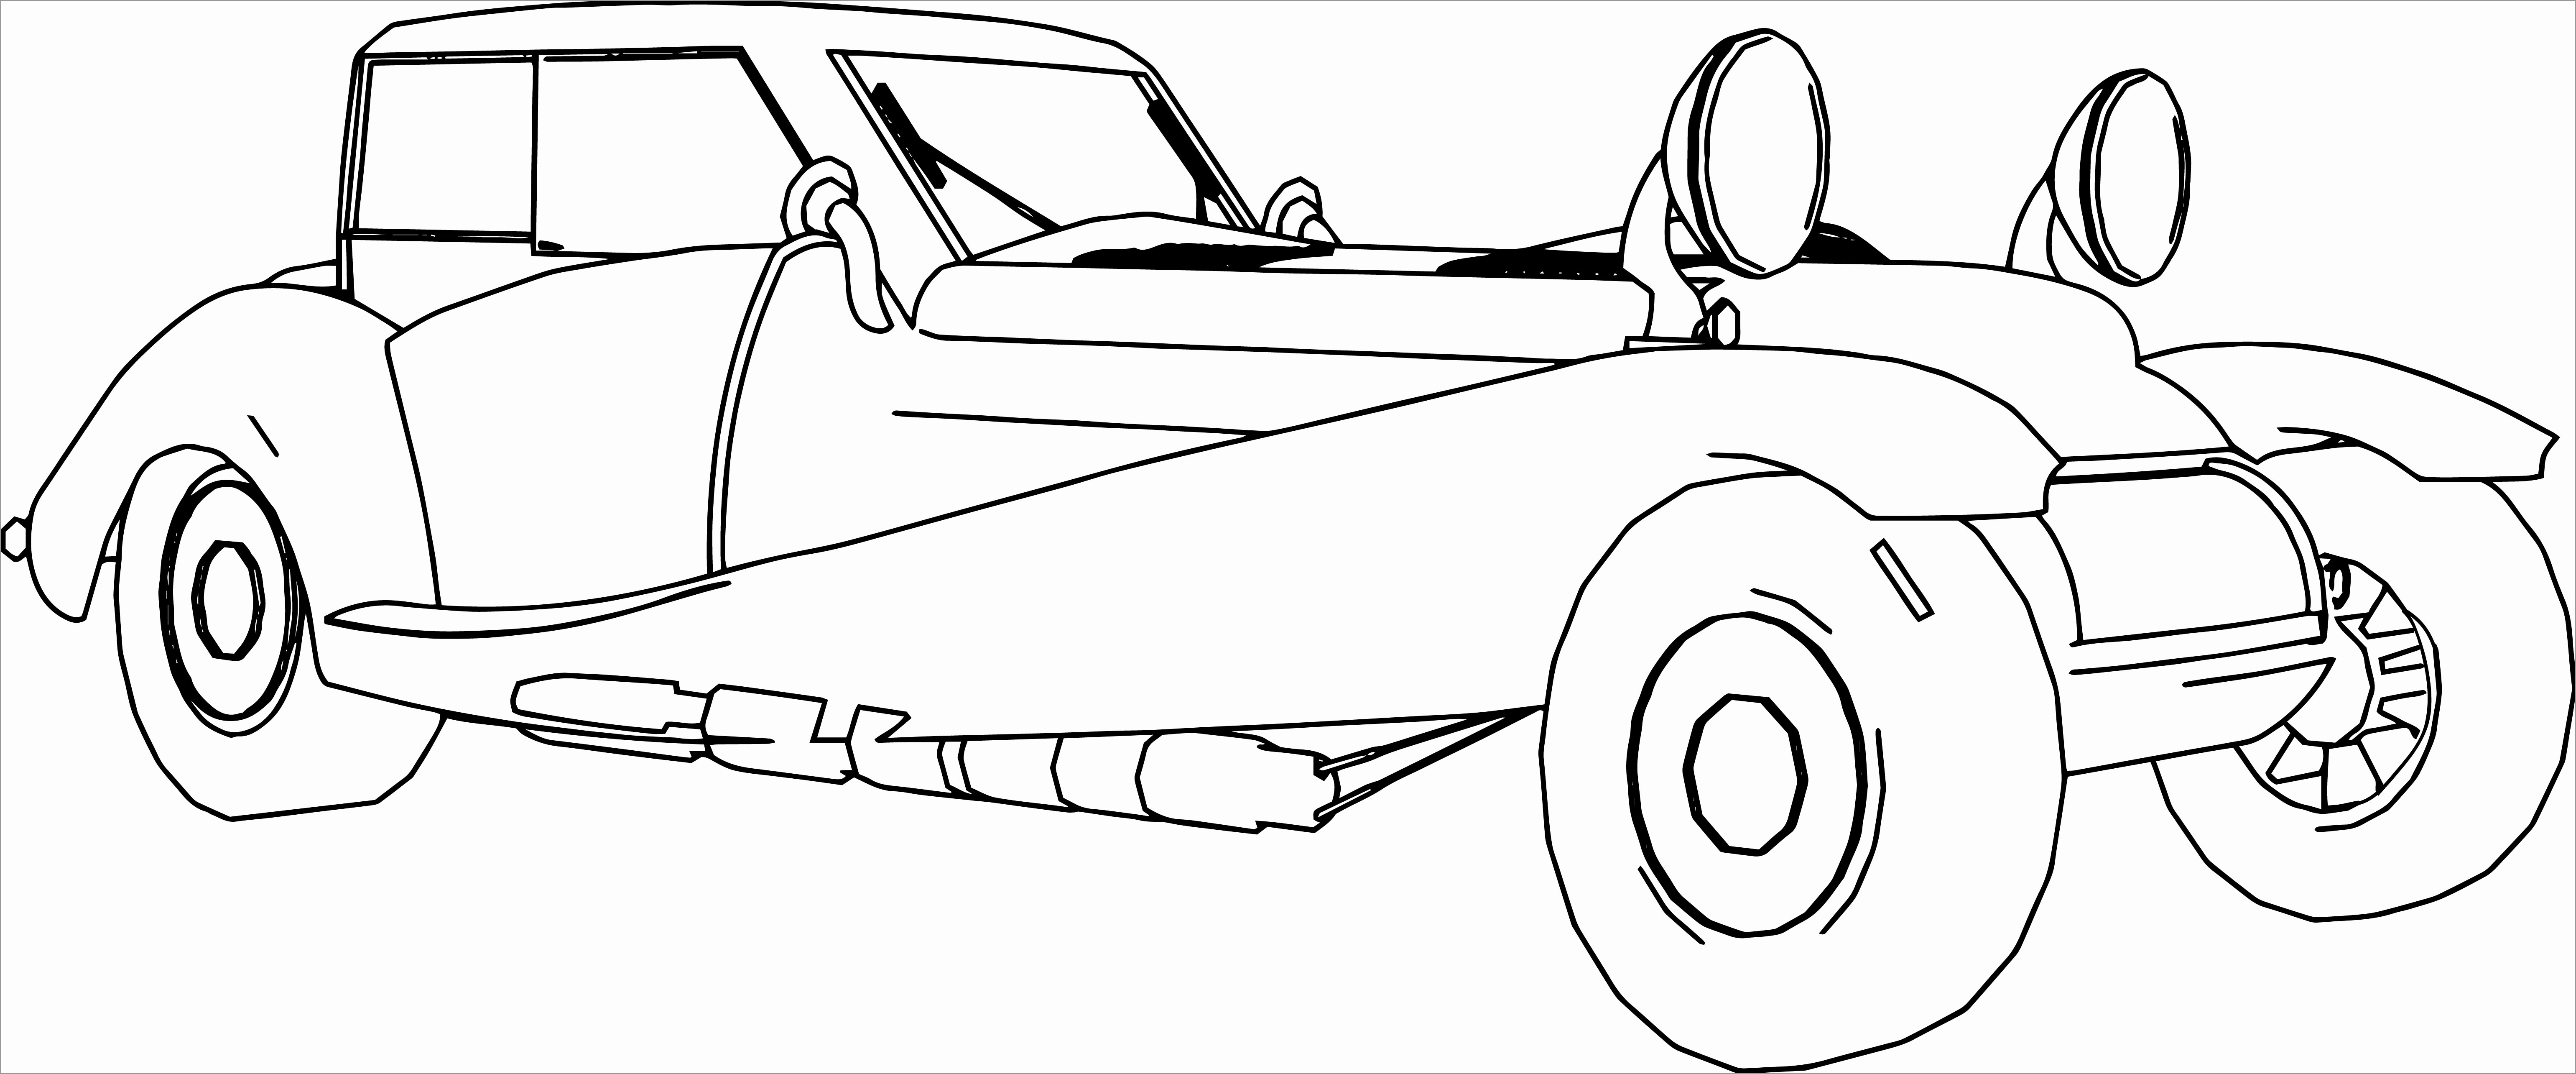 Antiques Sport Car Coloring Page to Print